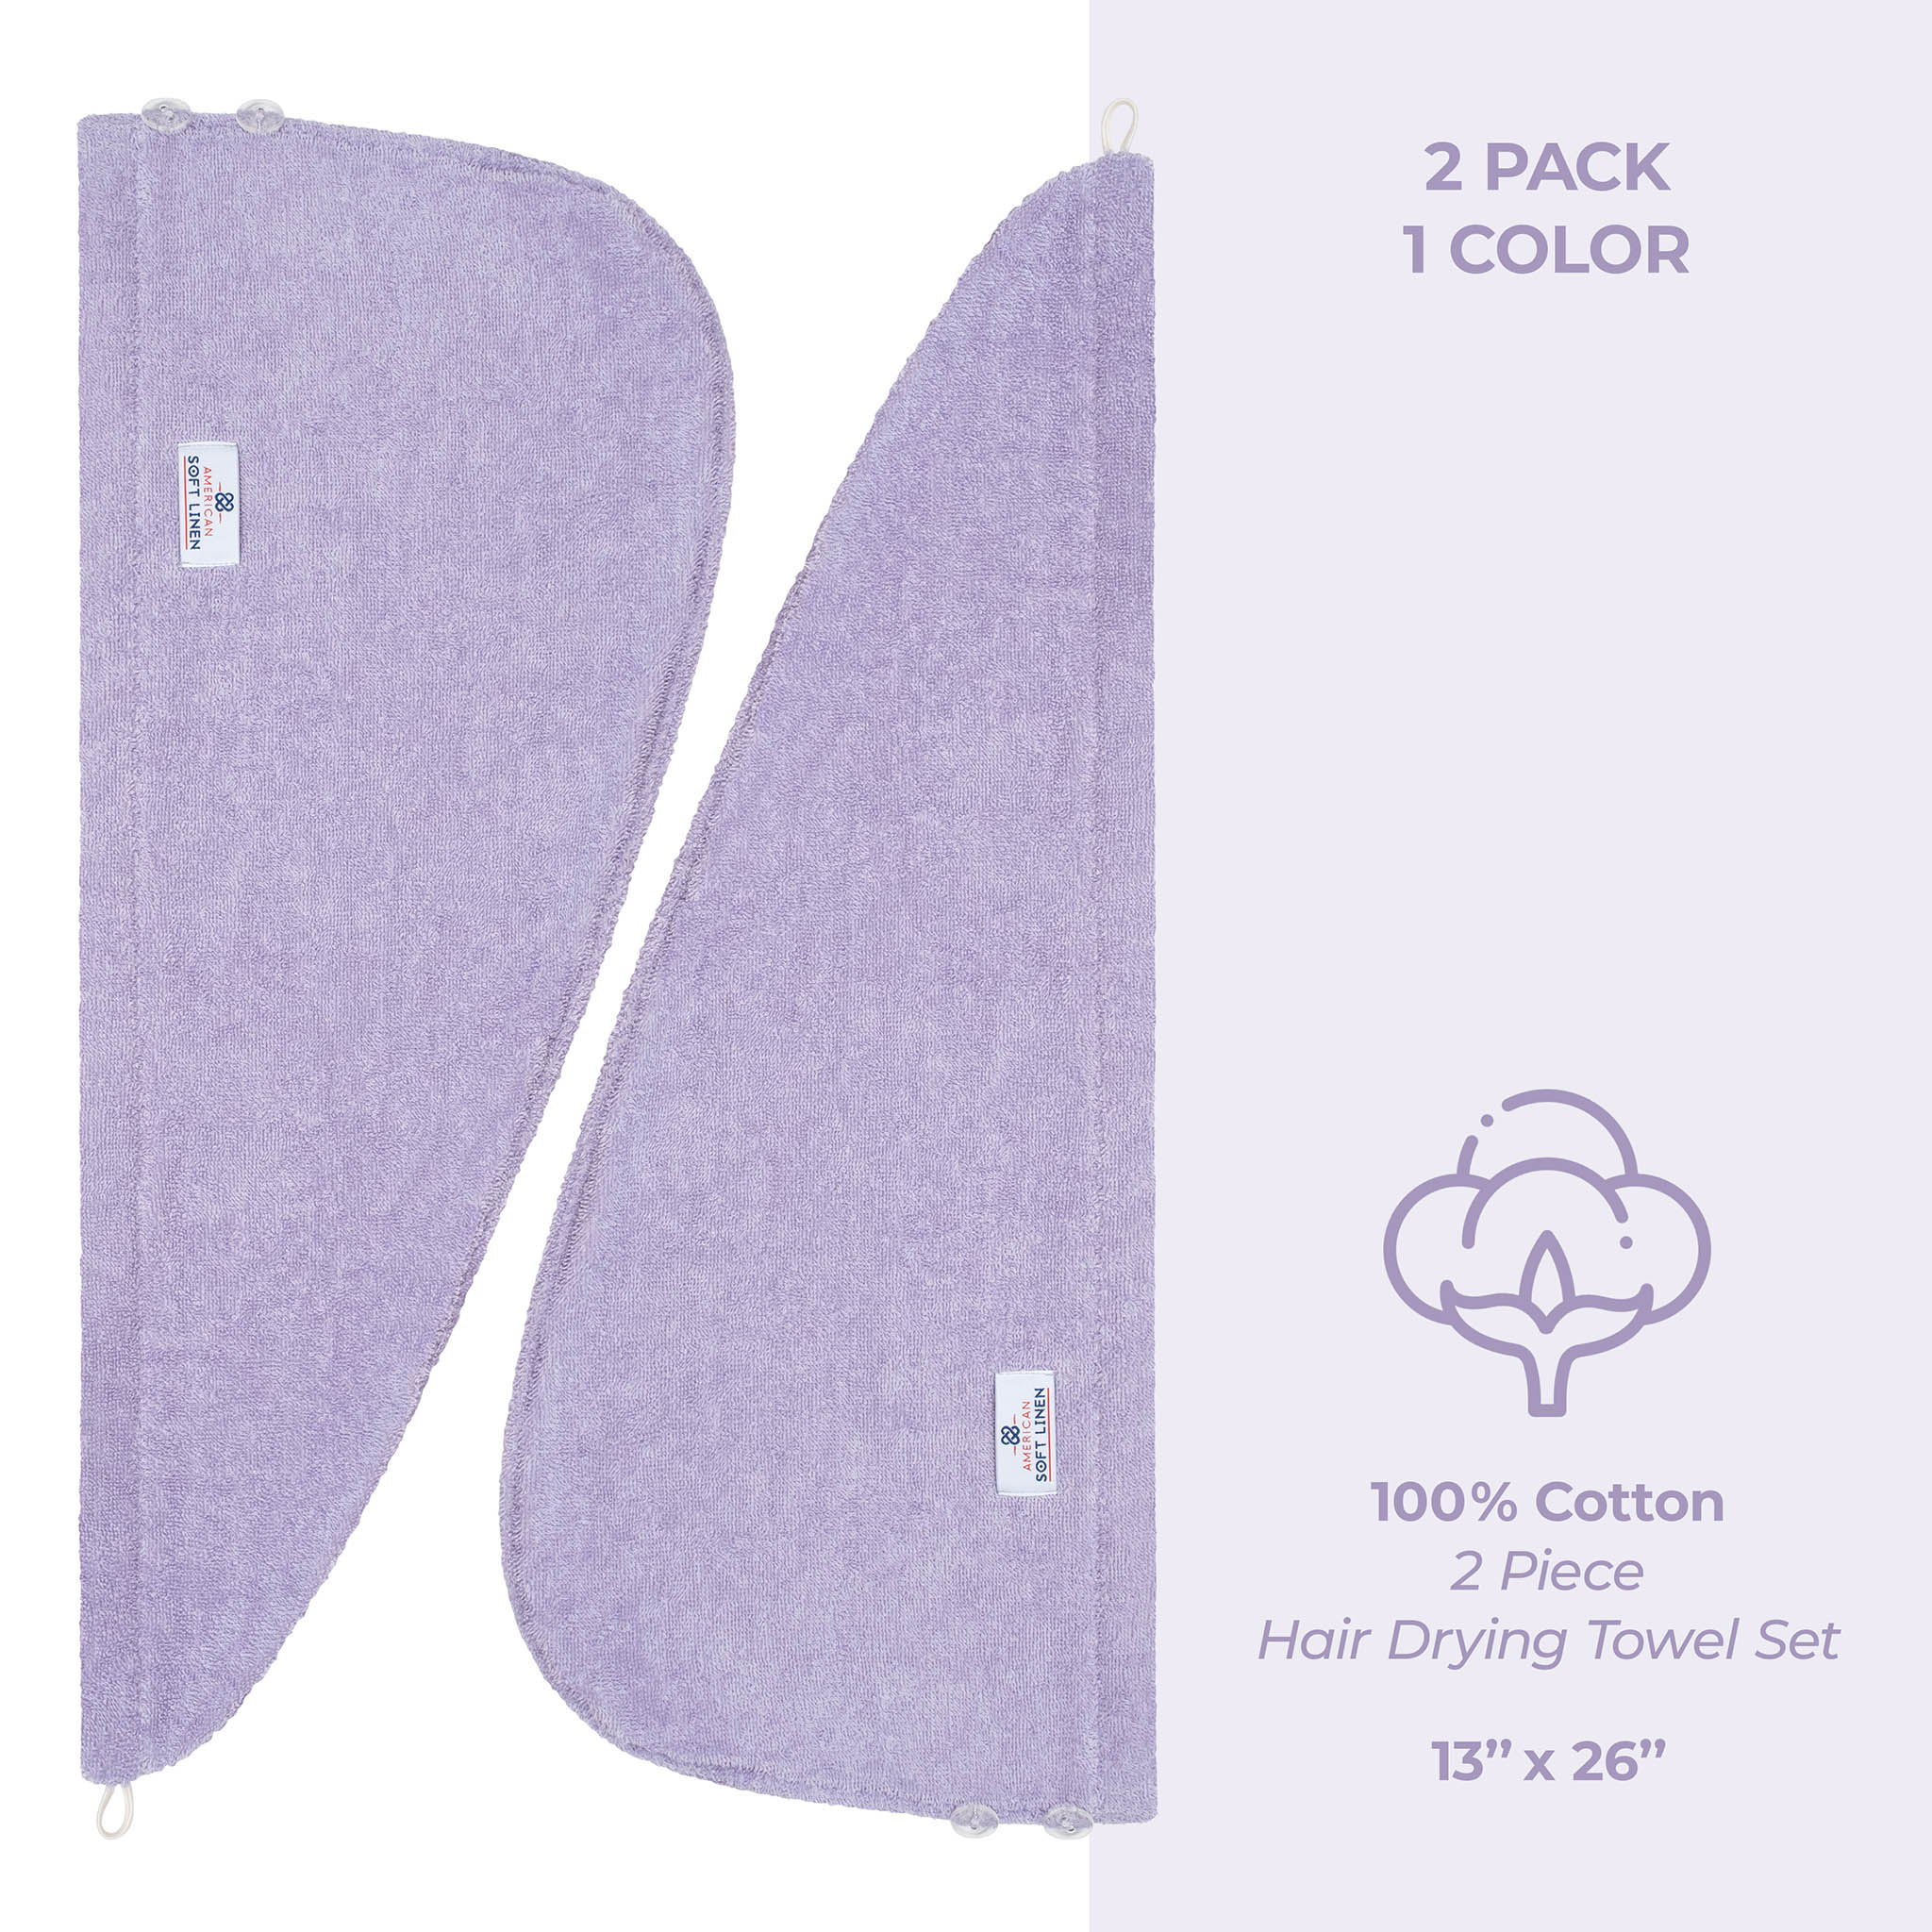 American Soft Linen 100% Cotton Hair Drying Towels for Women 2 pack 75 set case pack lilac-4